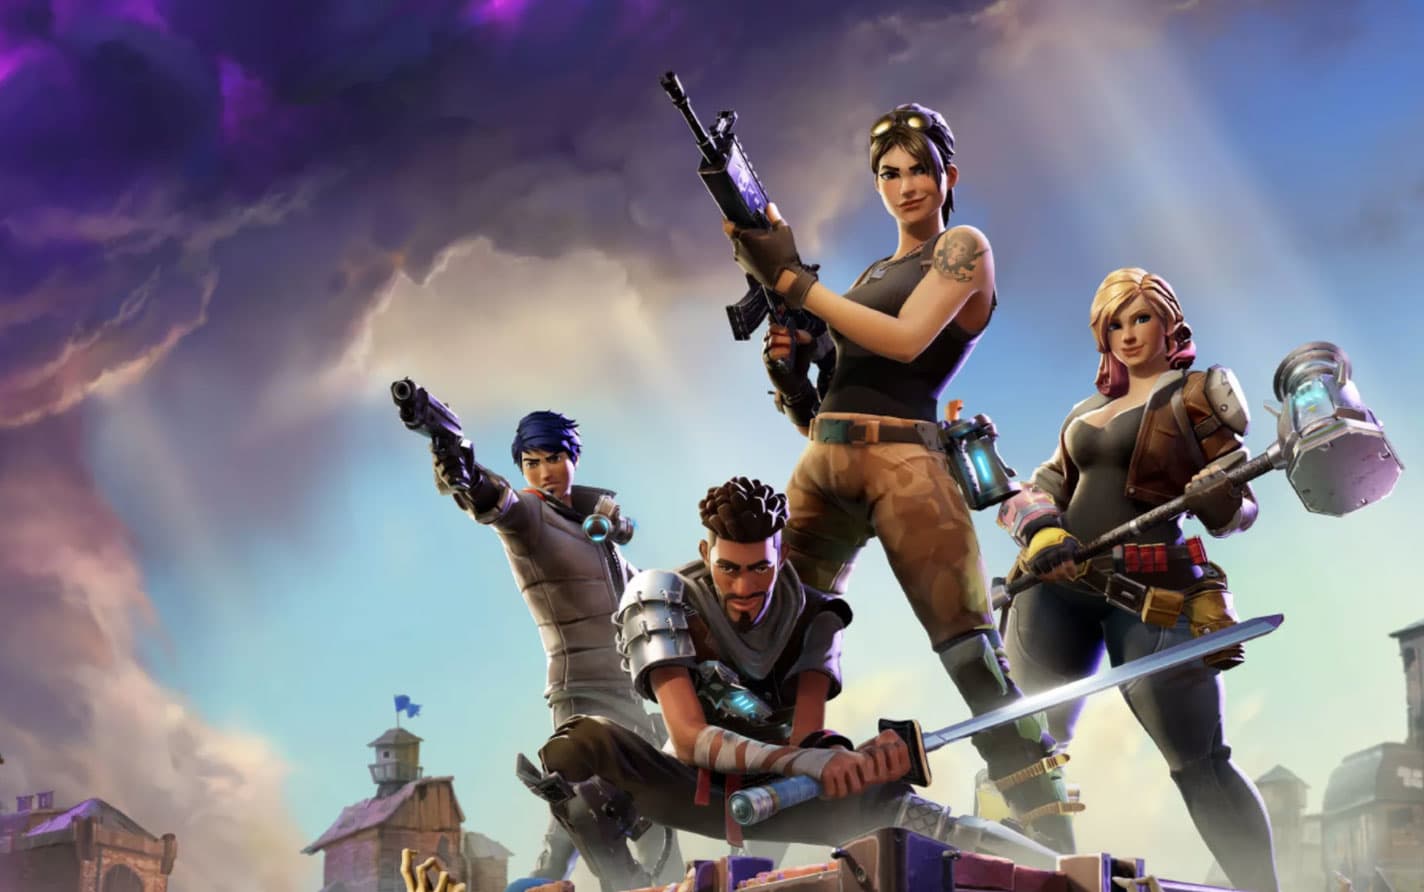 How Fortnite became the most successful free-to-play game ever